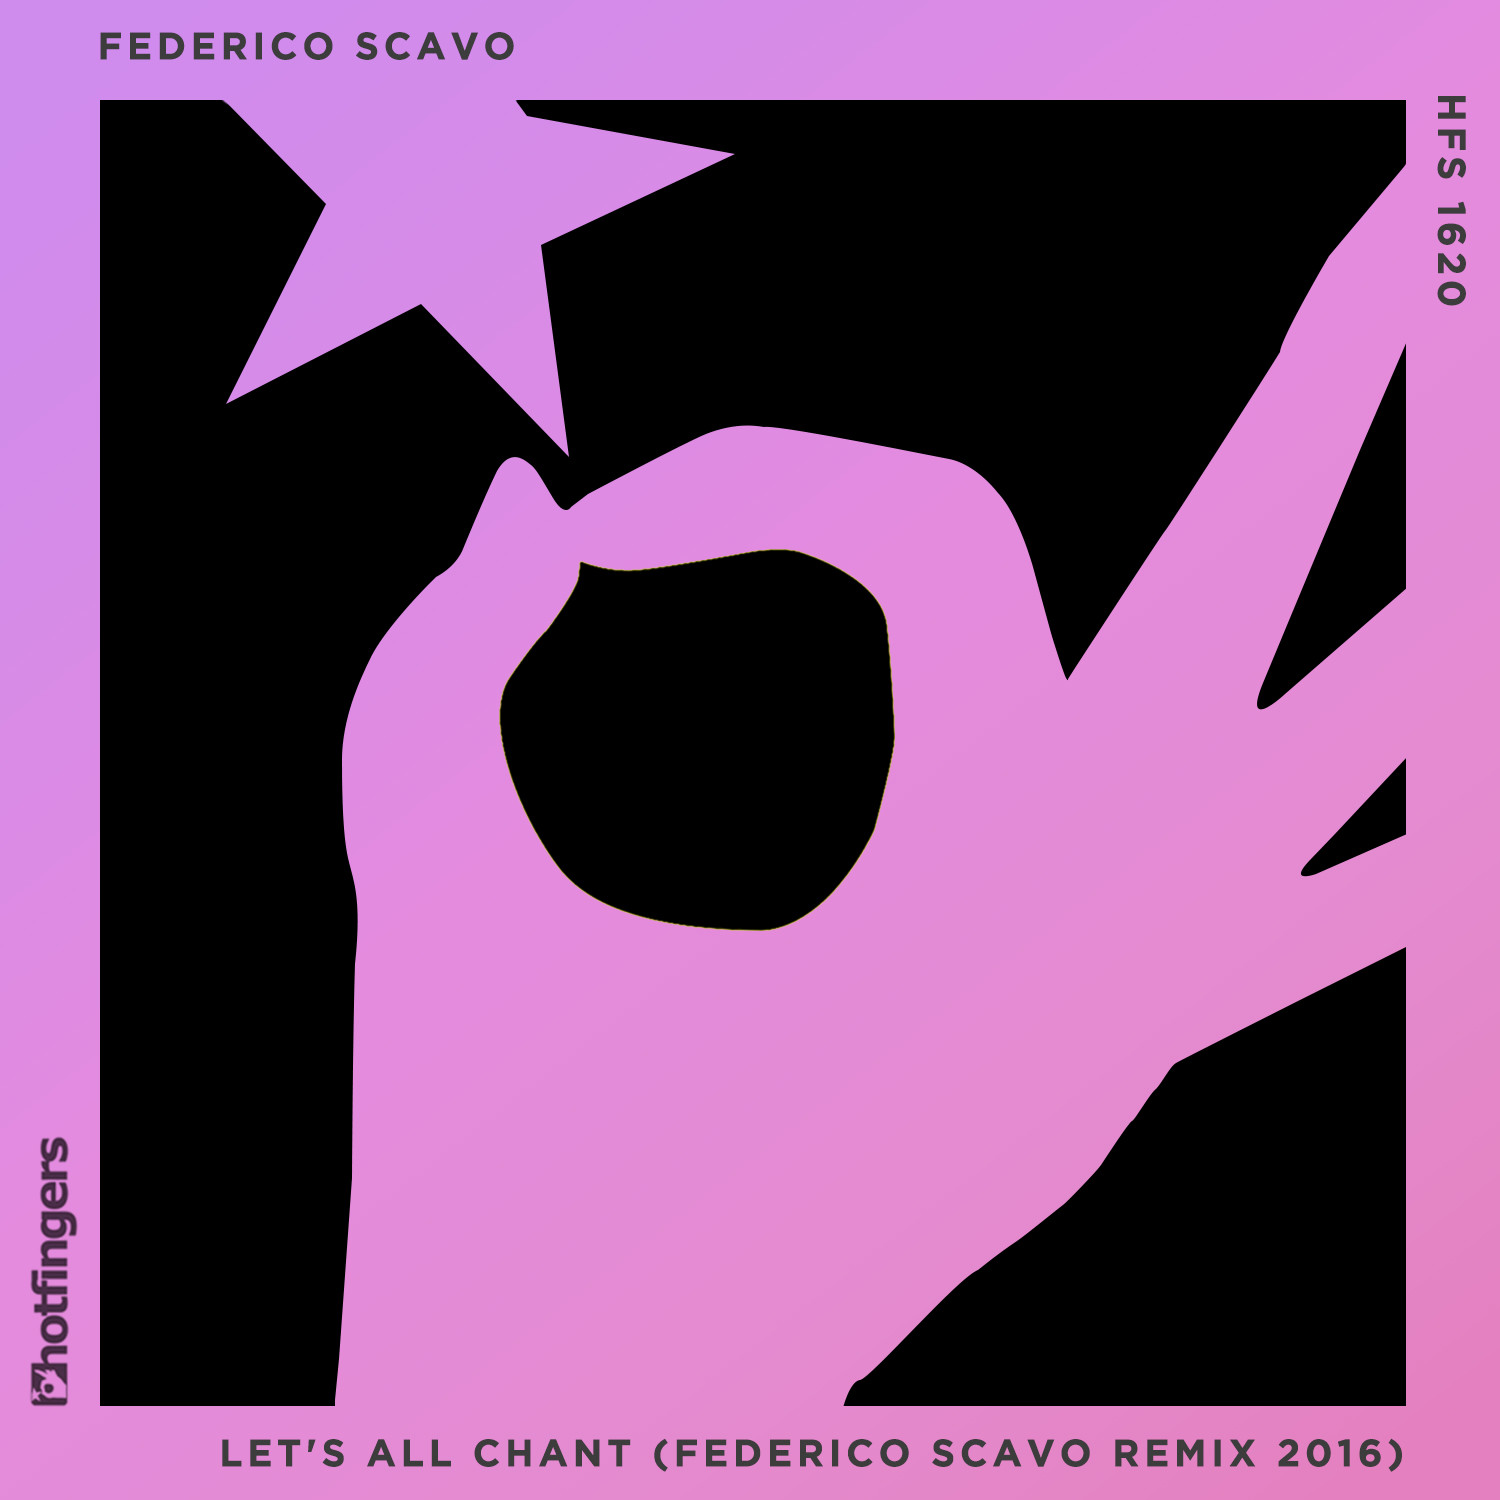 Let's All Chant (Federico Scavo 2016 Remix)